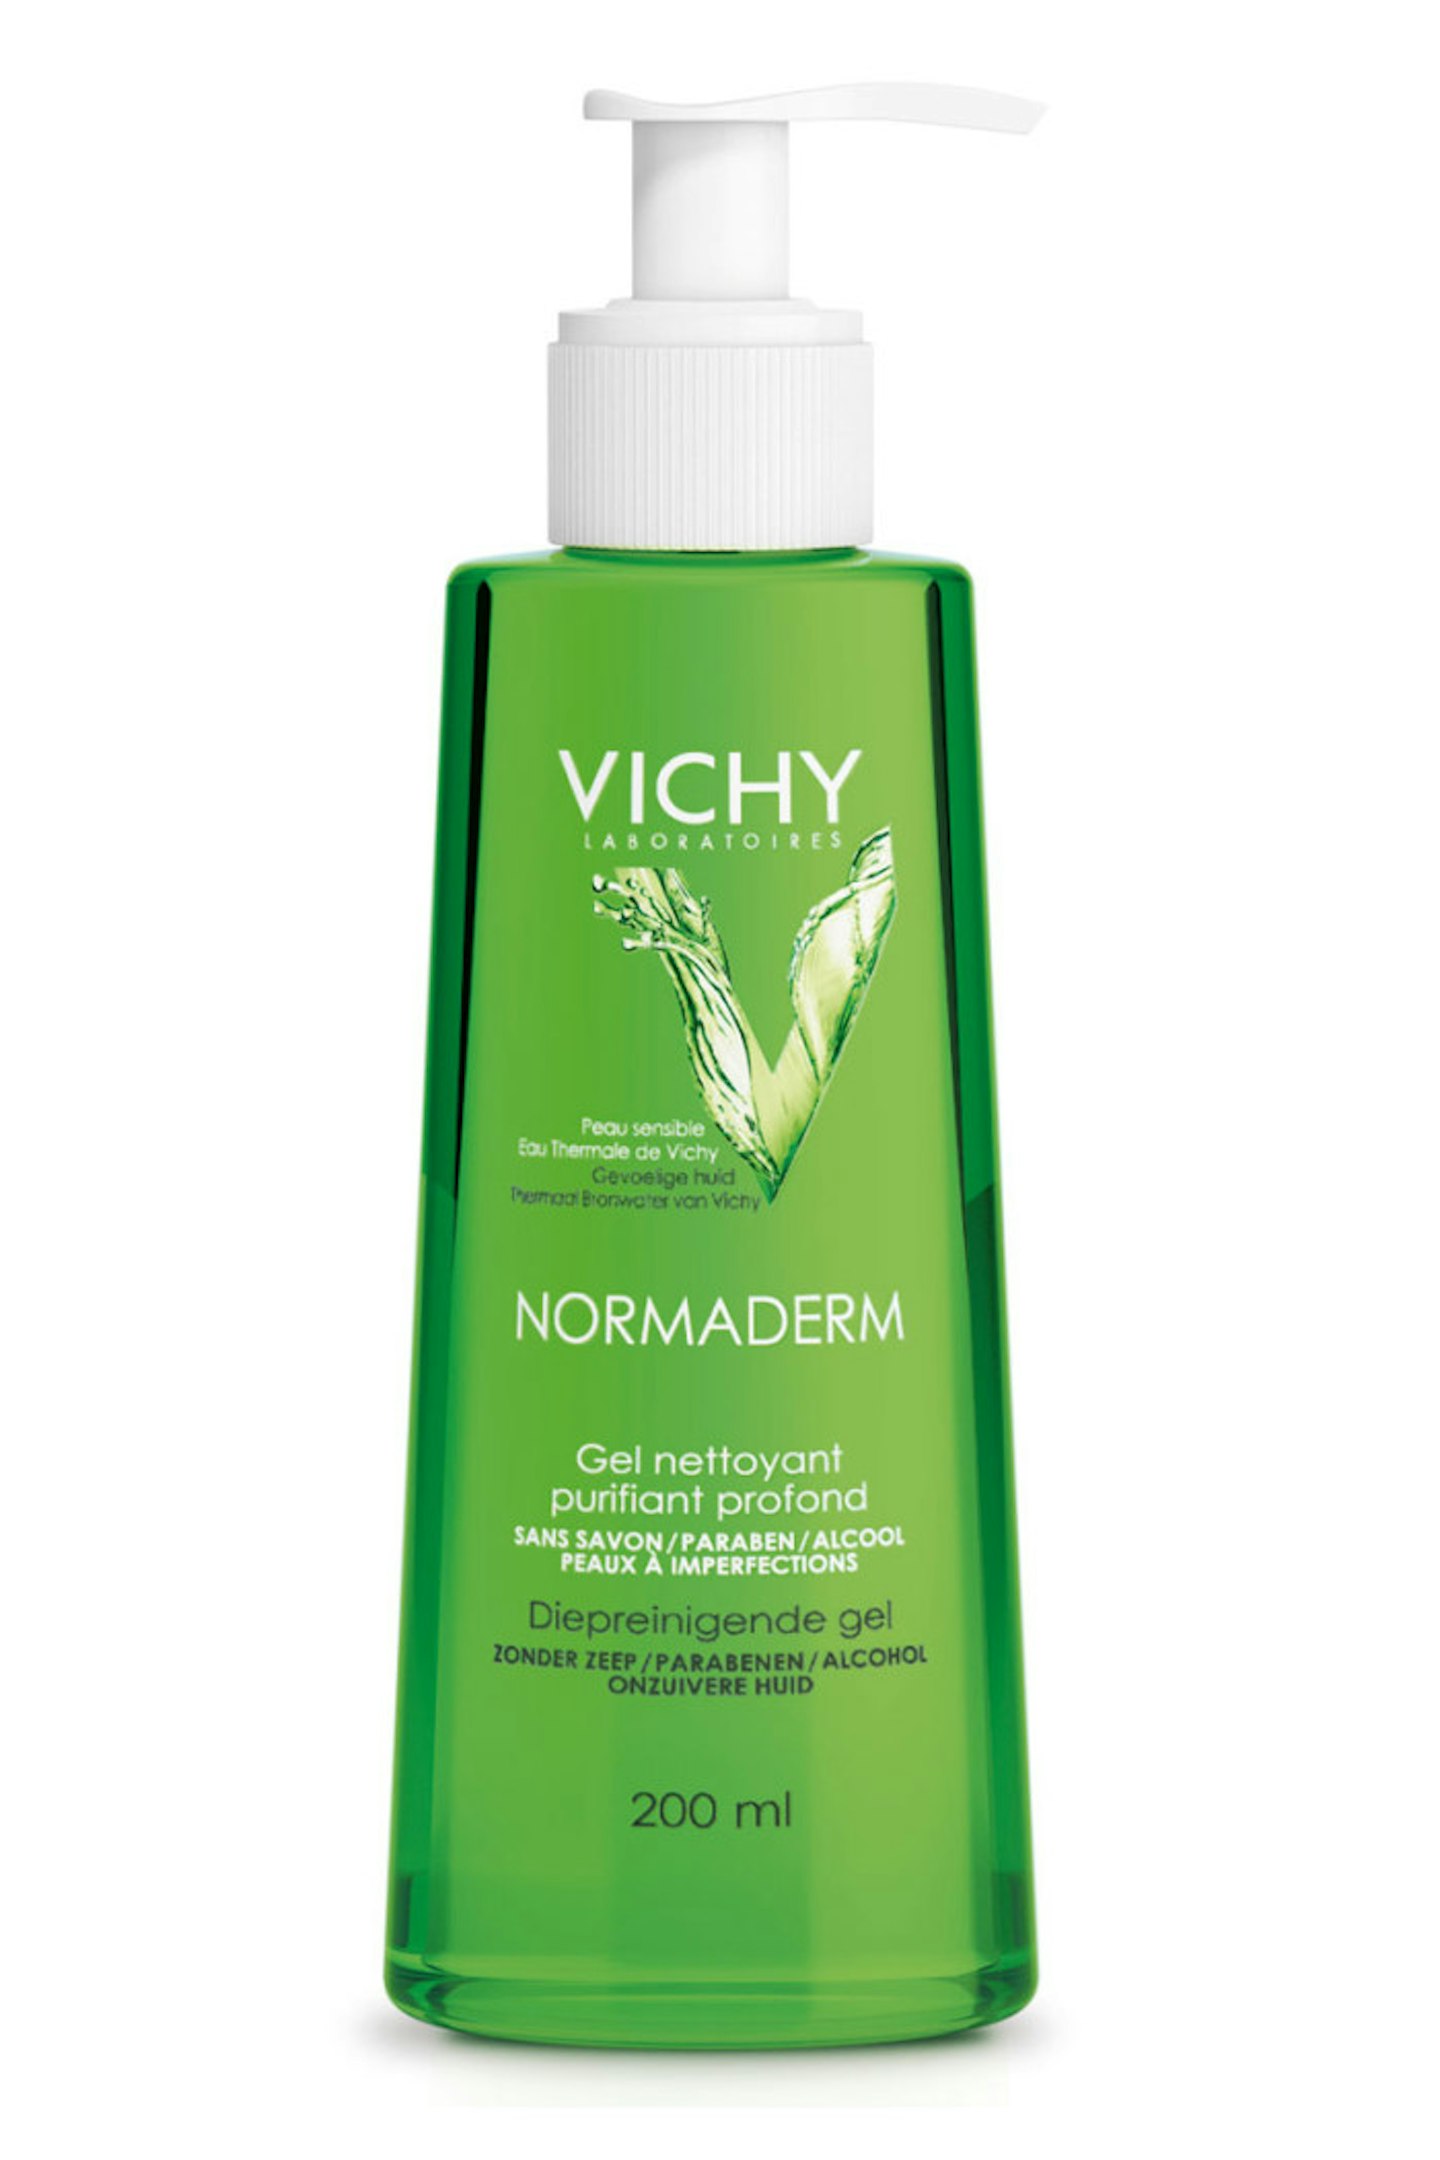 Vichy_Normaderm_Purifying_Cleansing_Gel